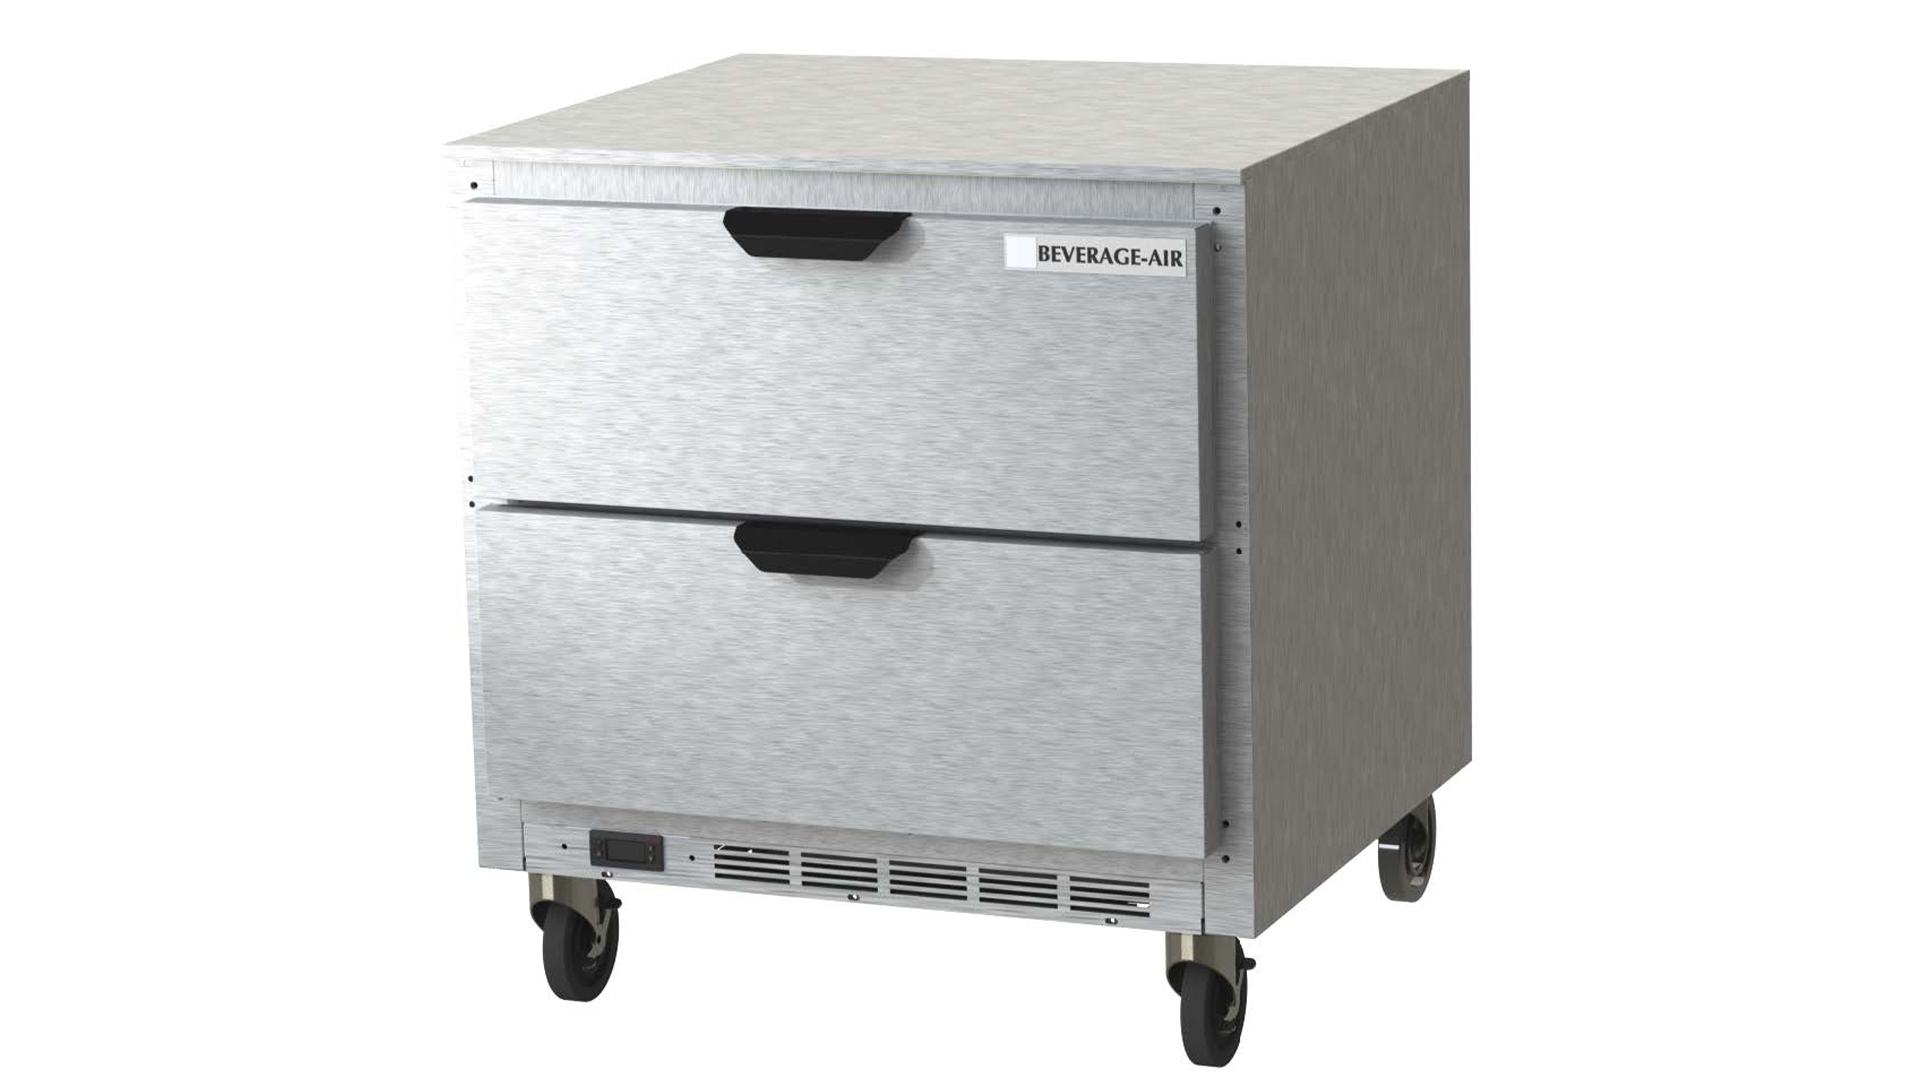 Beverage Air UCFD32AHC-2 Undercounter Freezer 32"